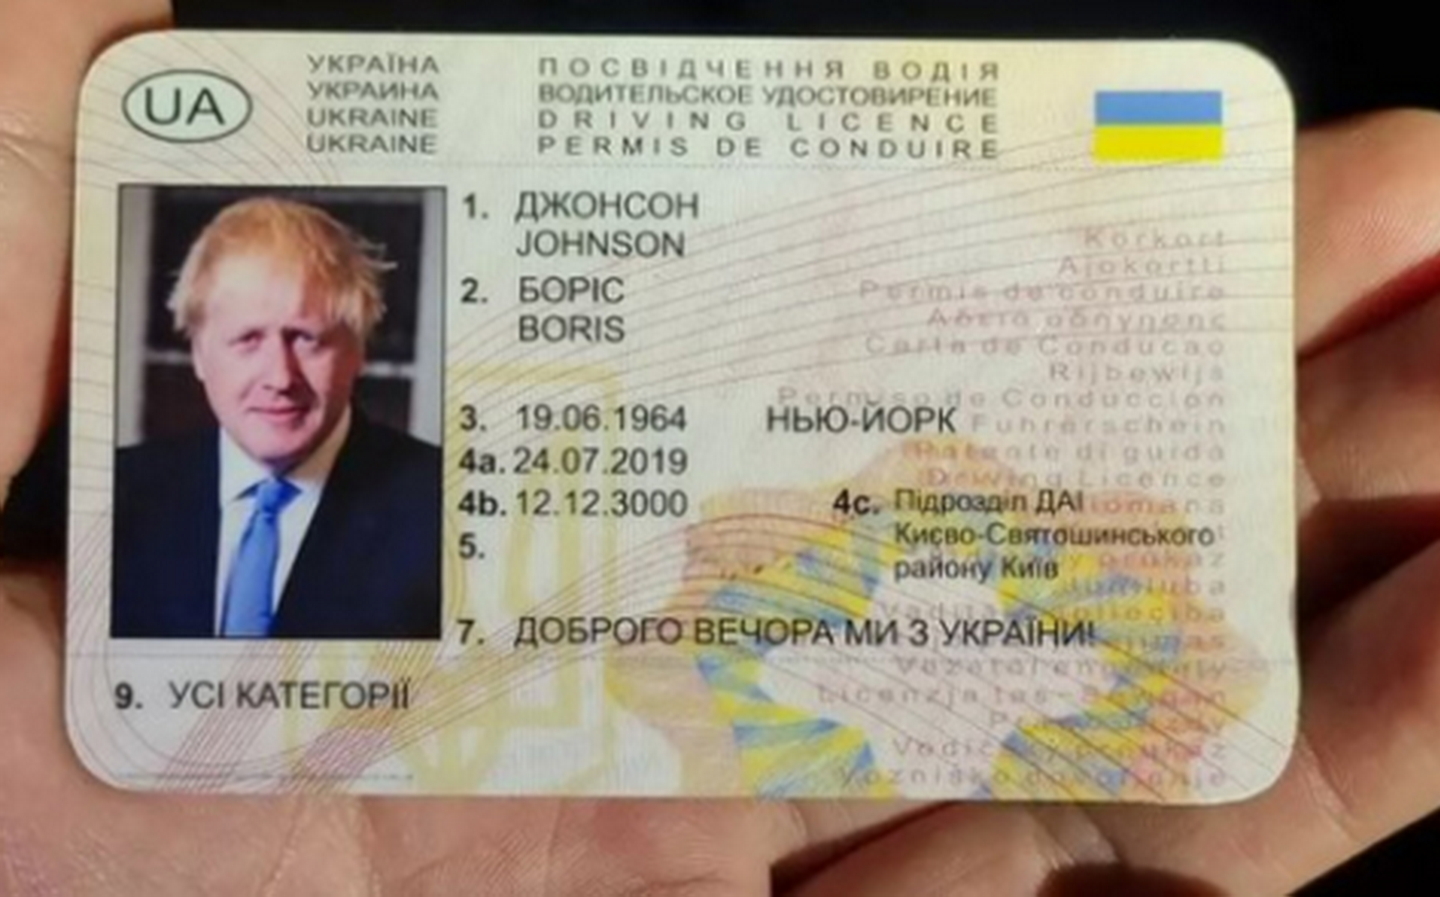 Dutch police arrested a man whose driving licence bore the name and features of Boris Johnson